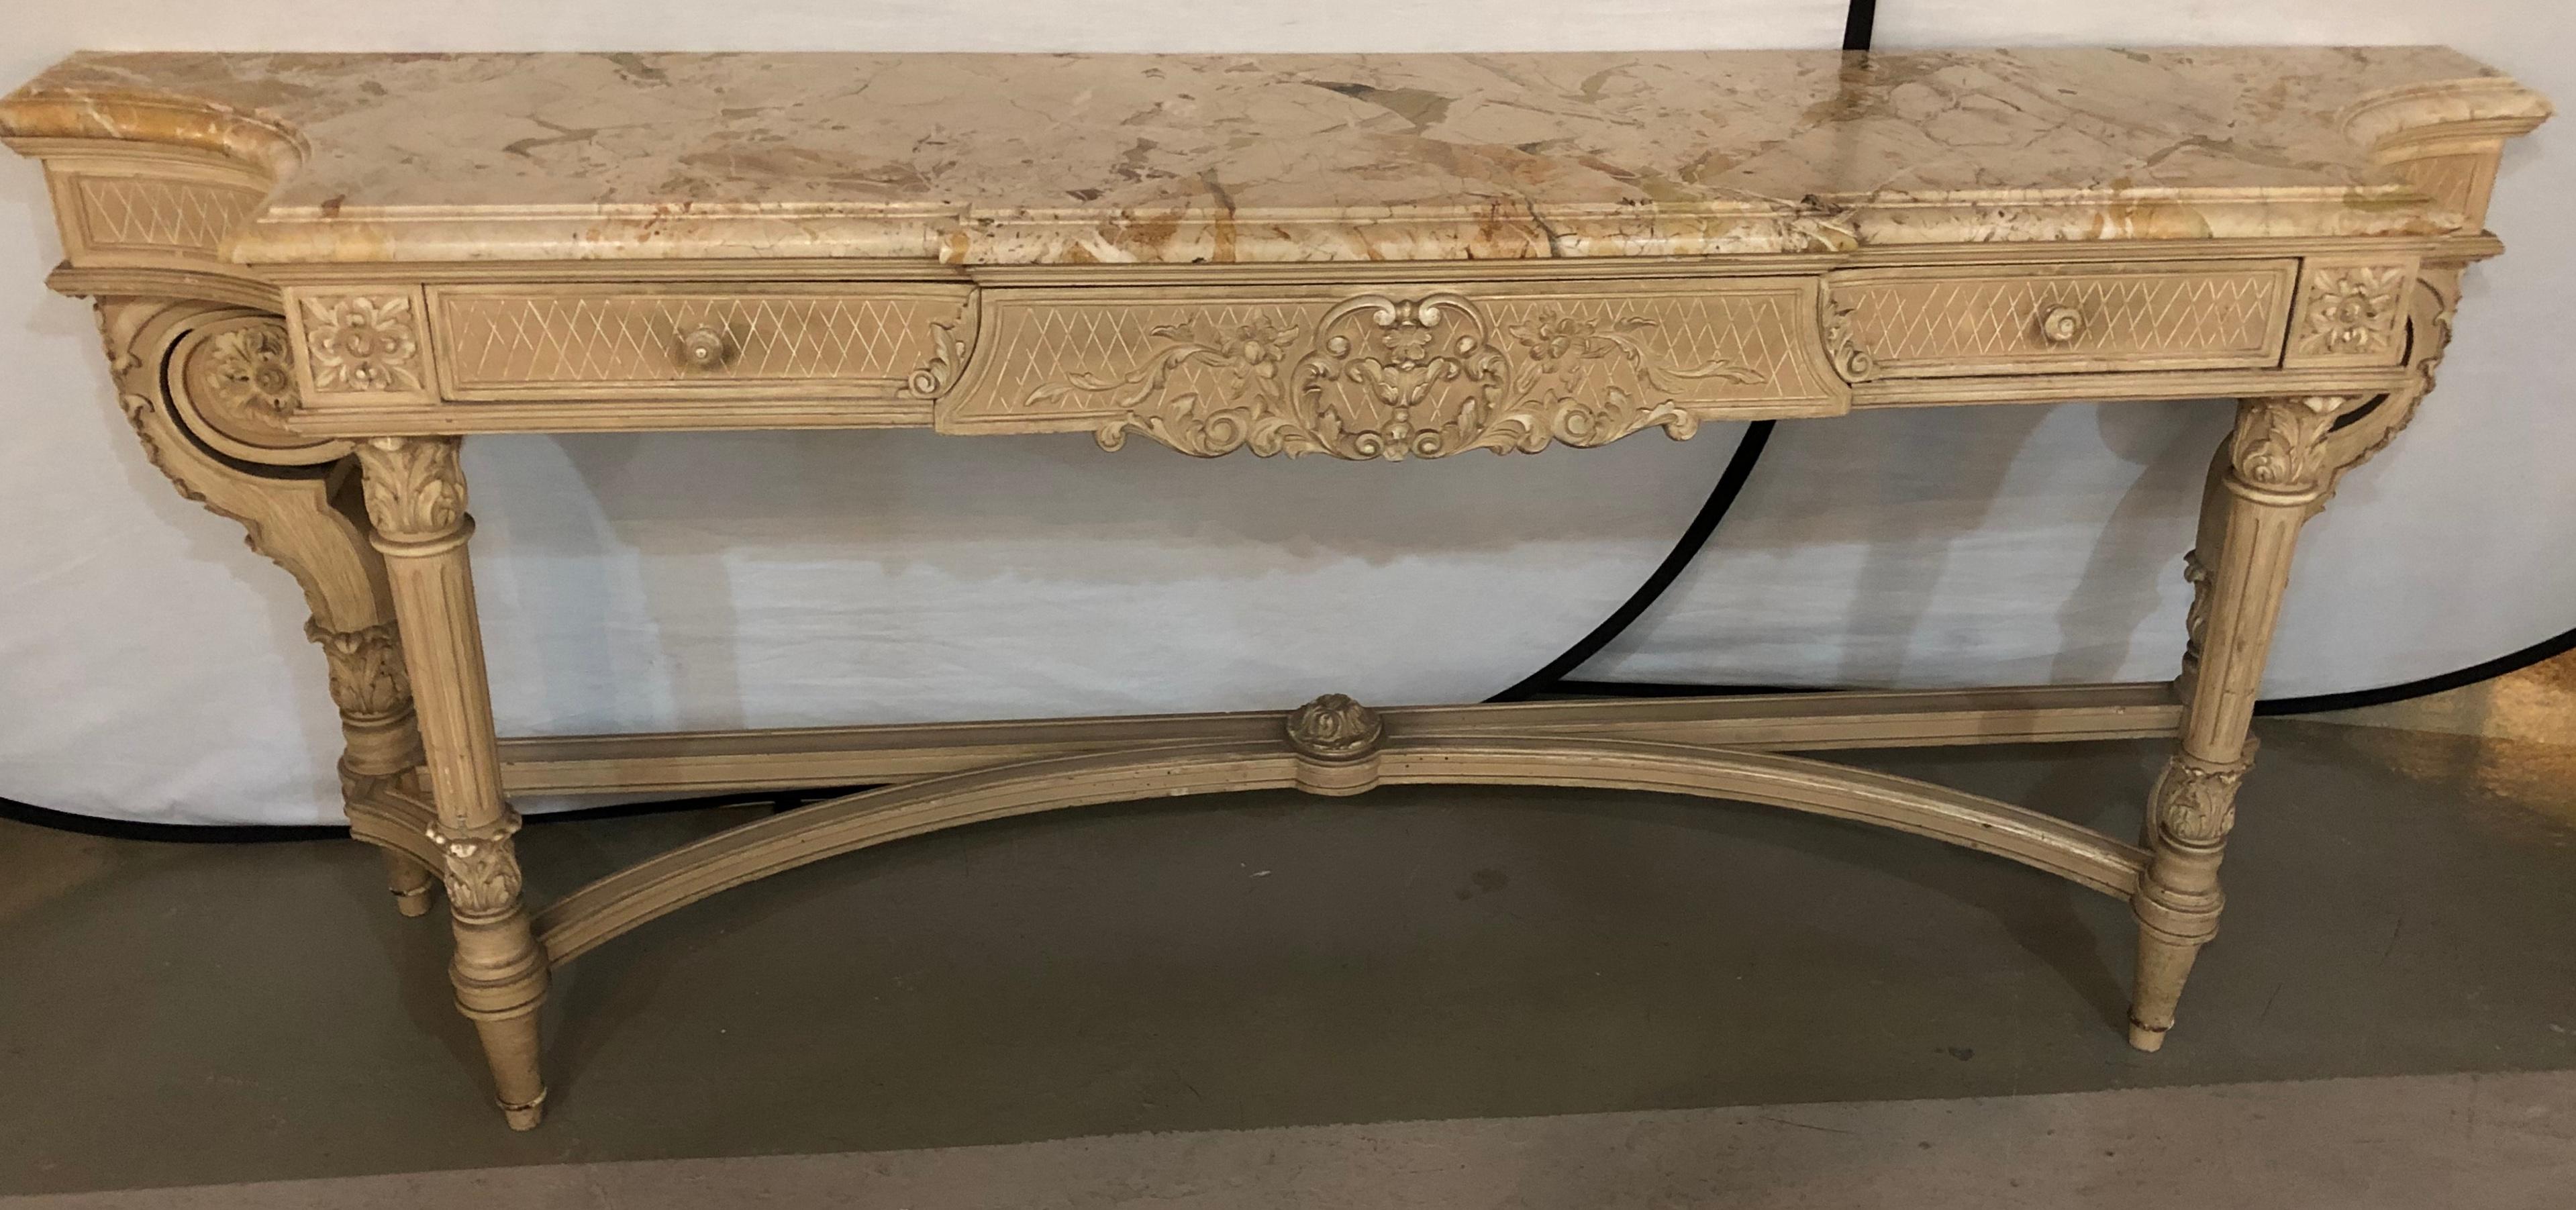 Antique Louis XVI Style Maison Jansen marble-top sideboard or console table. This large and impressive original paint decorated sideboard or console table is seen in the Maison Jansen archives. The off white cream distressed finish indicative of the